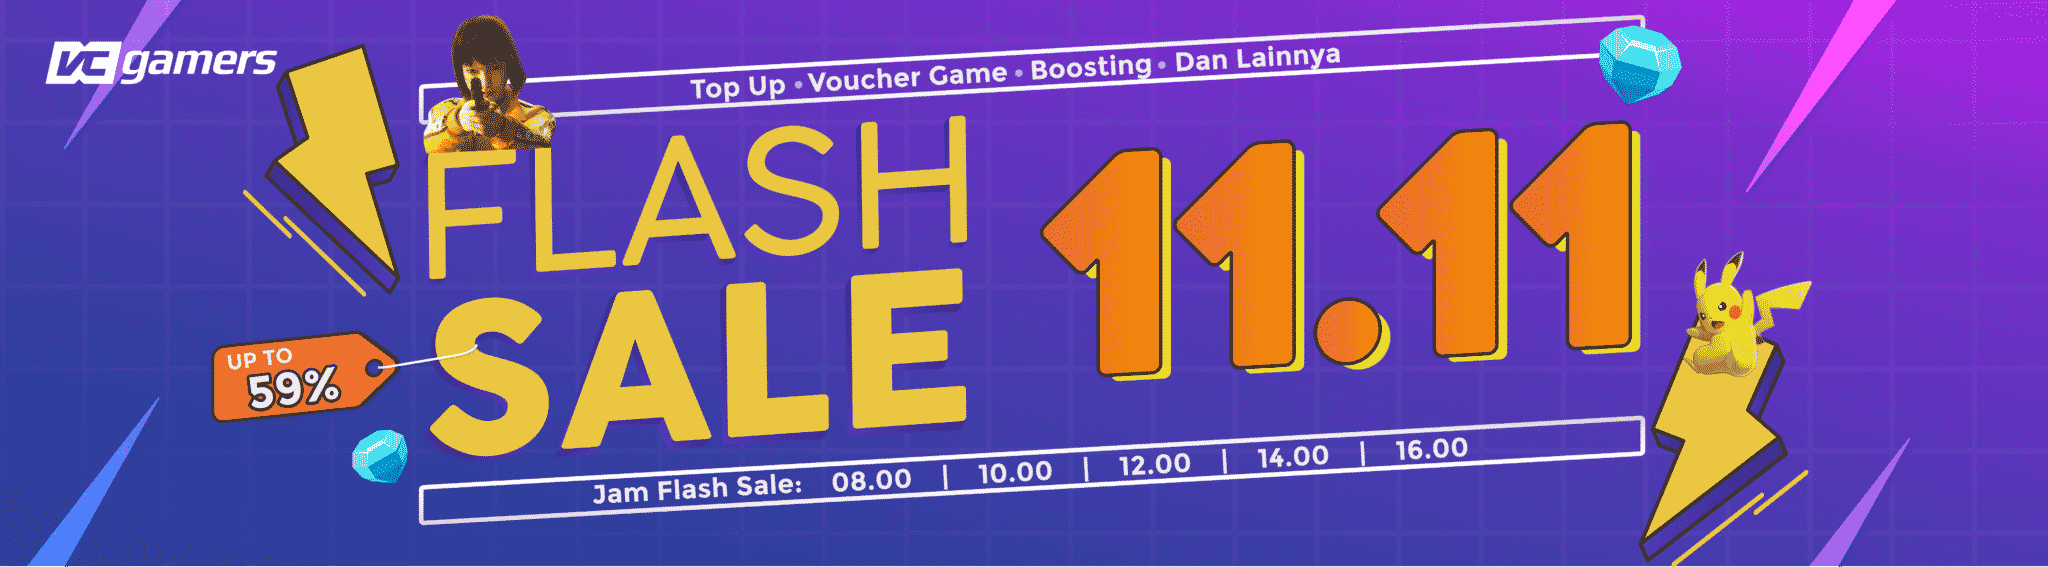 flashsale 11.11 vcgamers